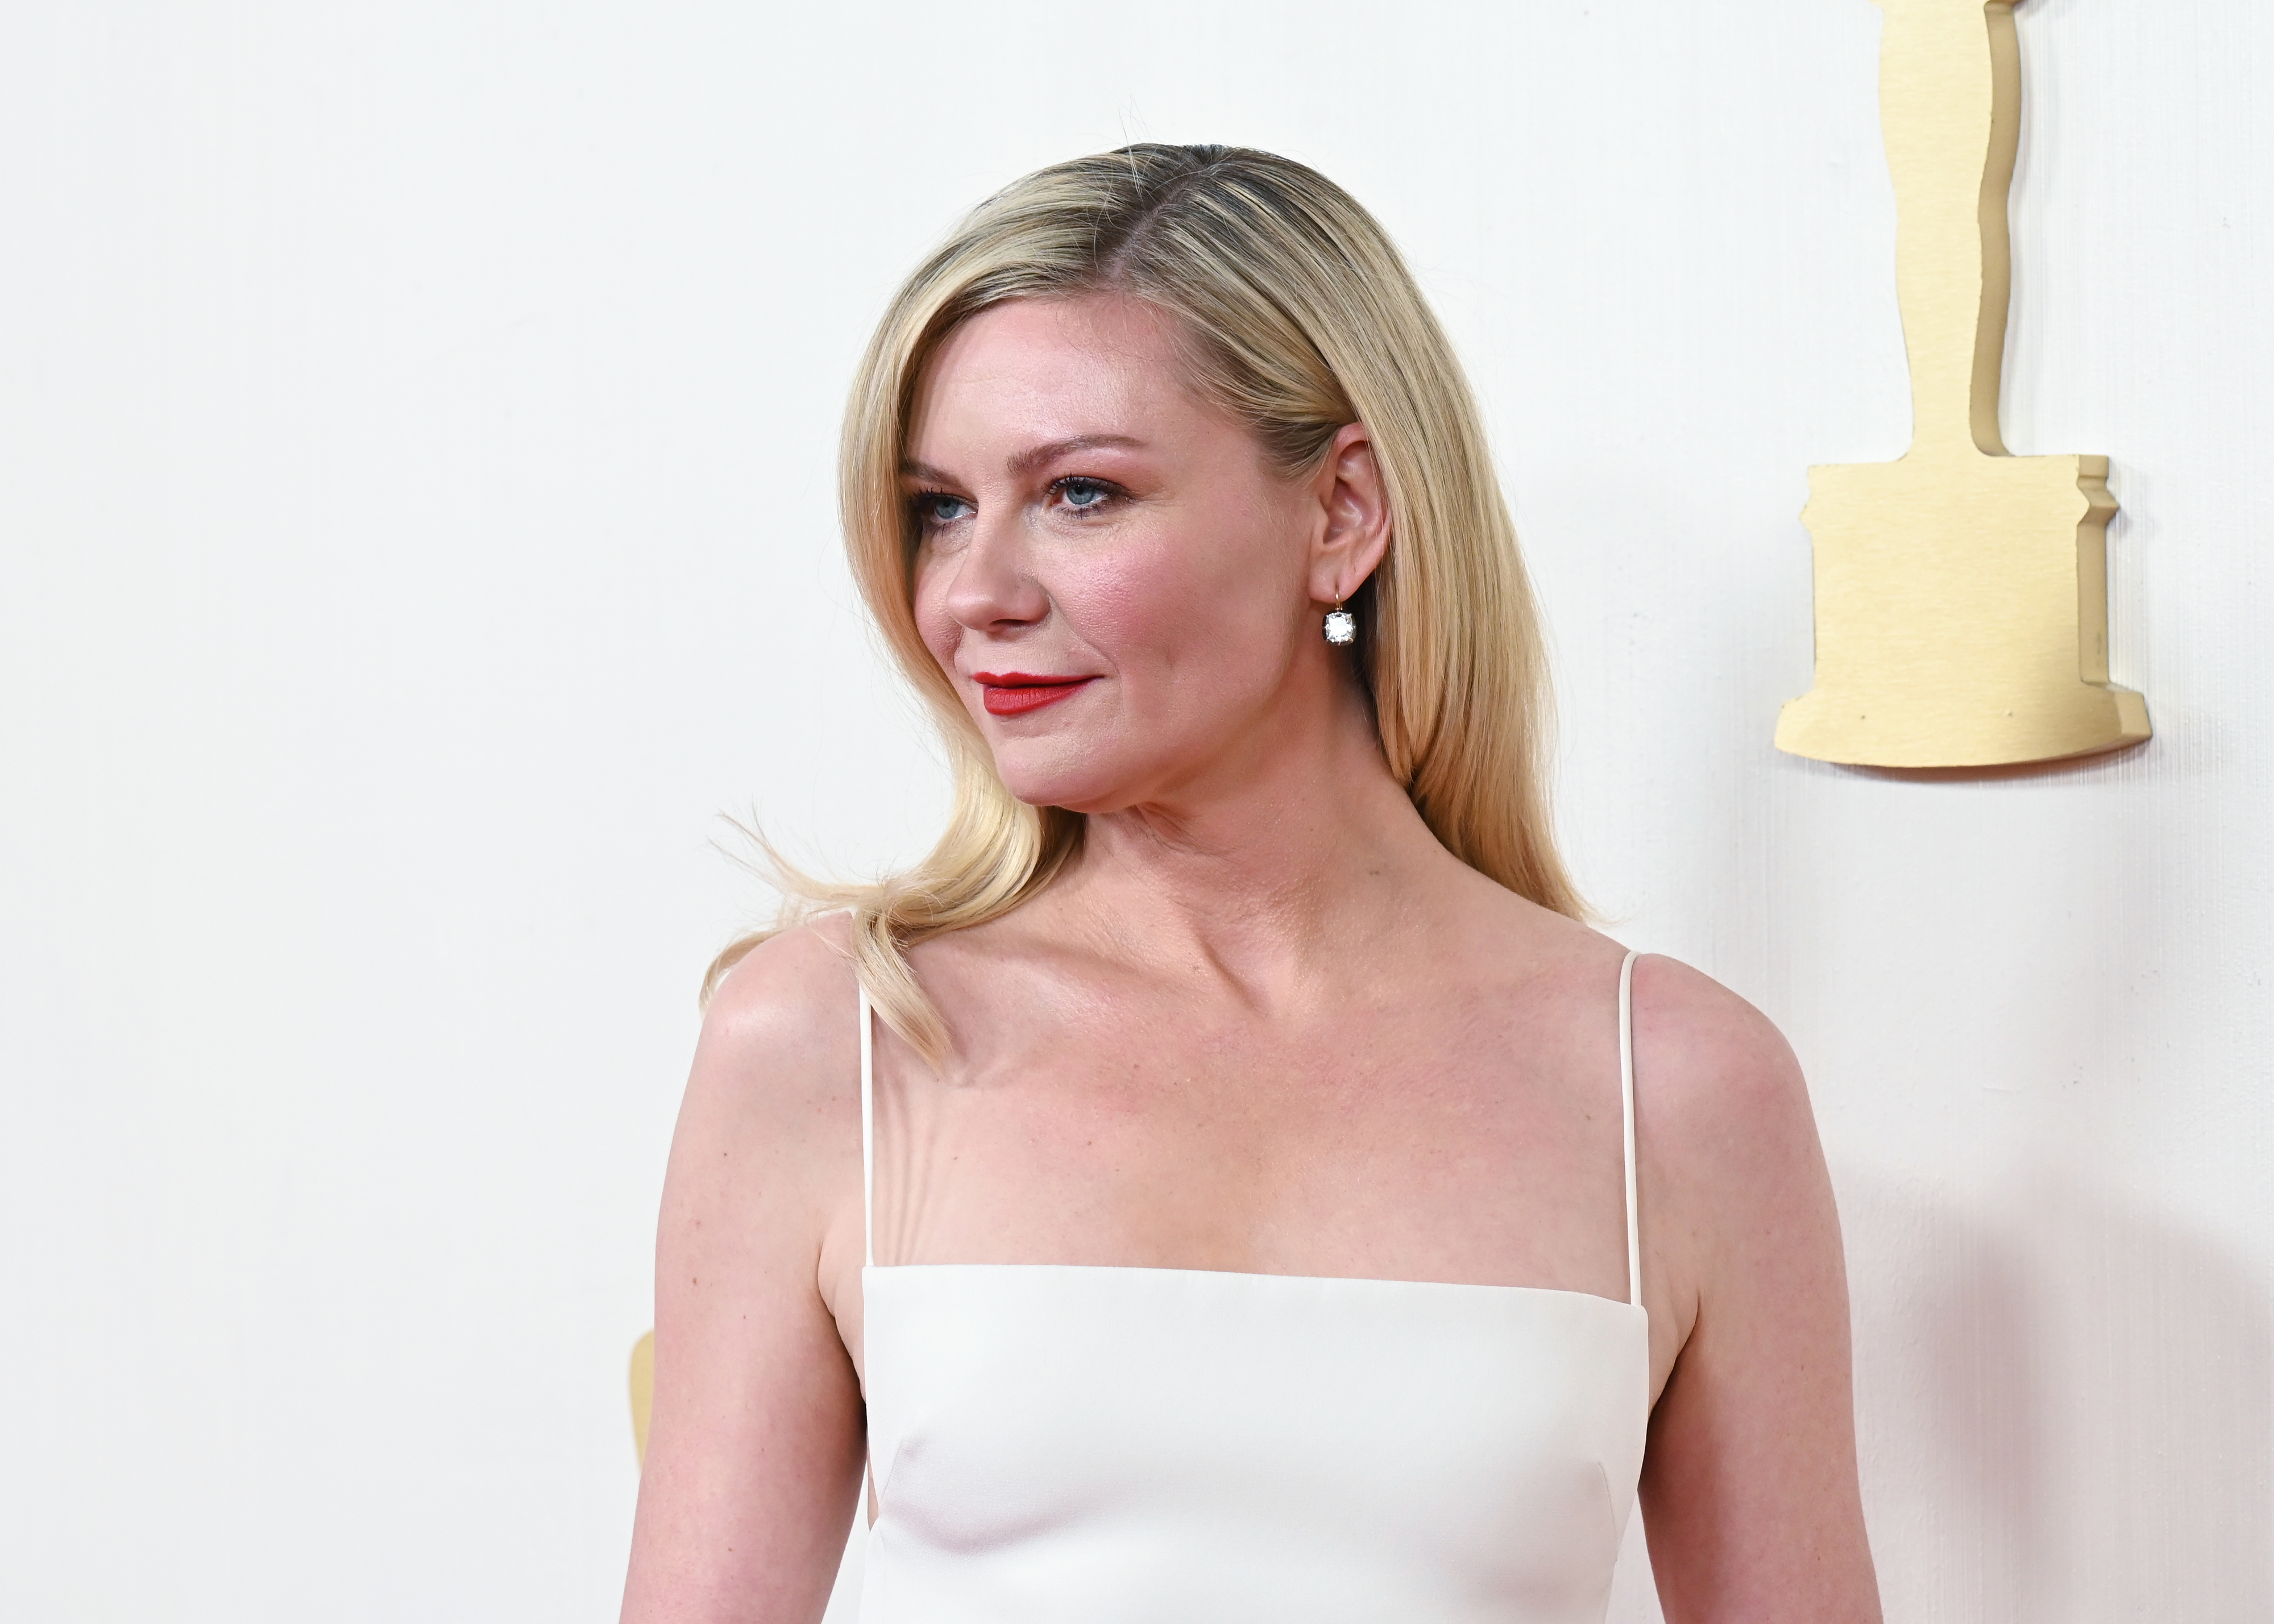 Kirsten Dunst at an event, wearing a sleek strapless dress, her hair styled to one side